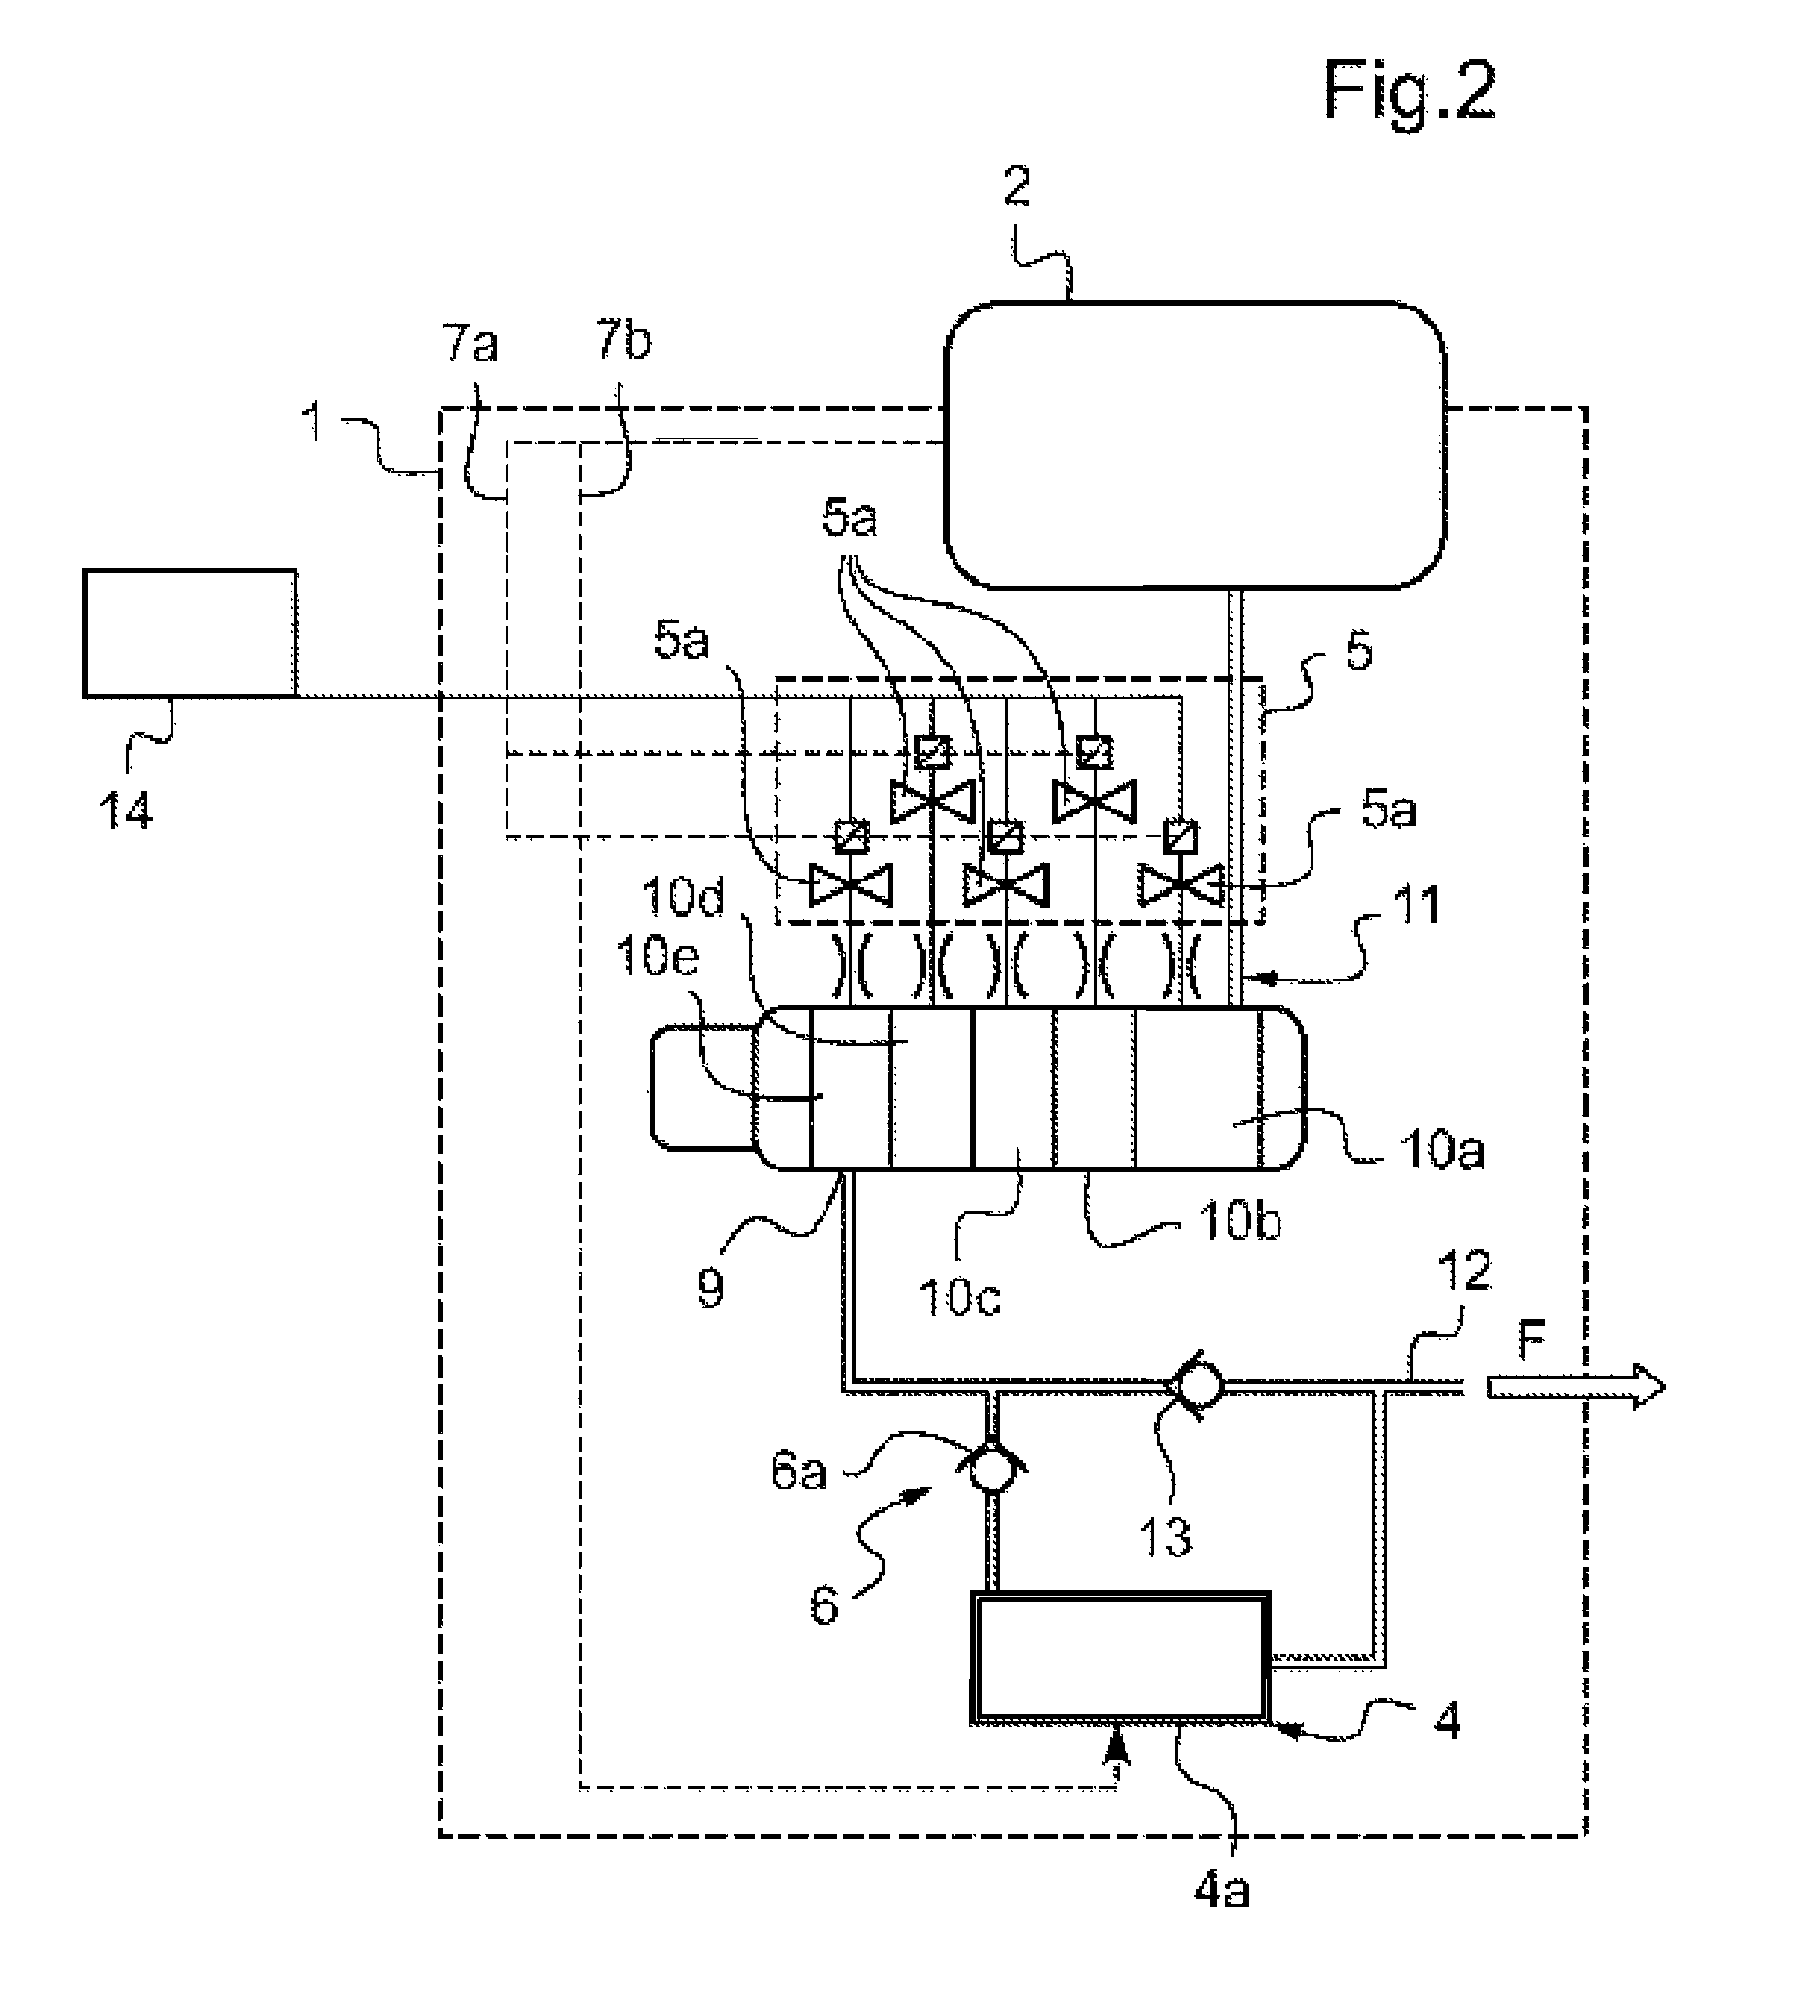 Method and device for pumping of a process chamber